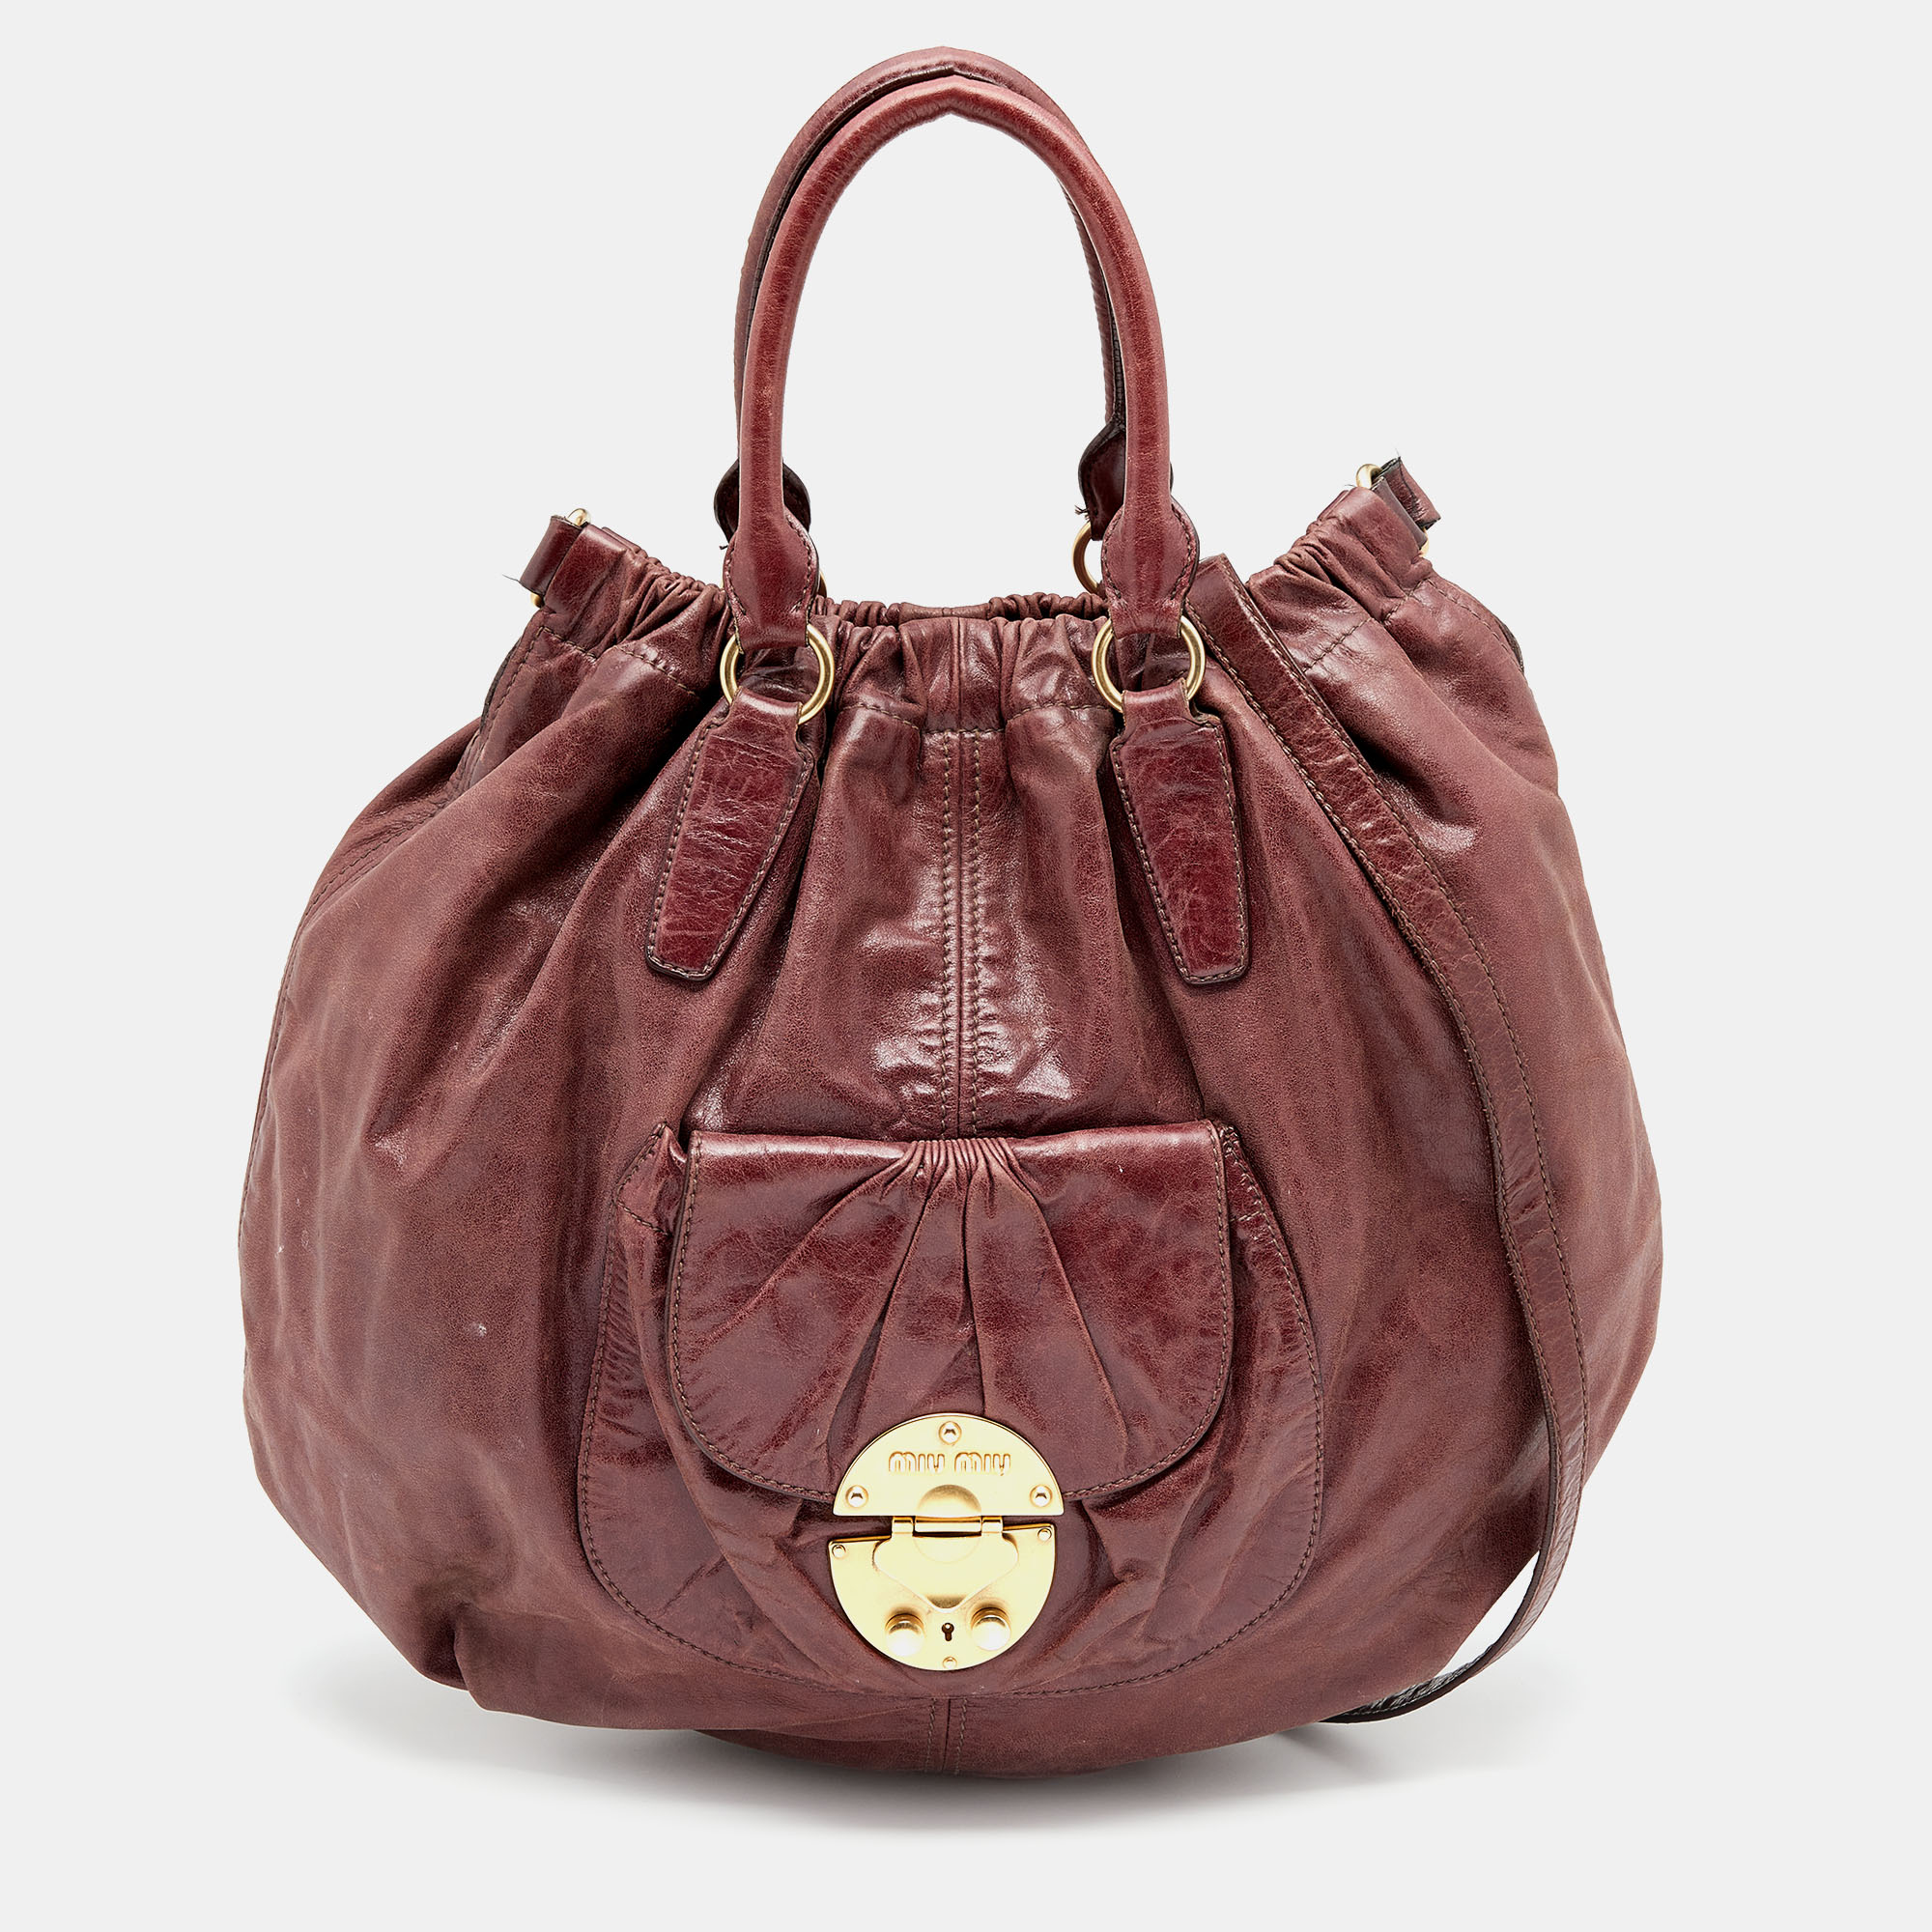 The front external pocket and dual carrying options enhance the practical utility of this Miu Miu hobo. Made from leather it gets a luxe update with the brand signature in gold tone on the front. The satin lined interior has more than enough space to perfectly house your daily essentials.